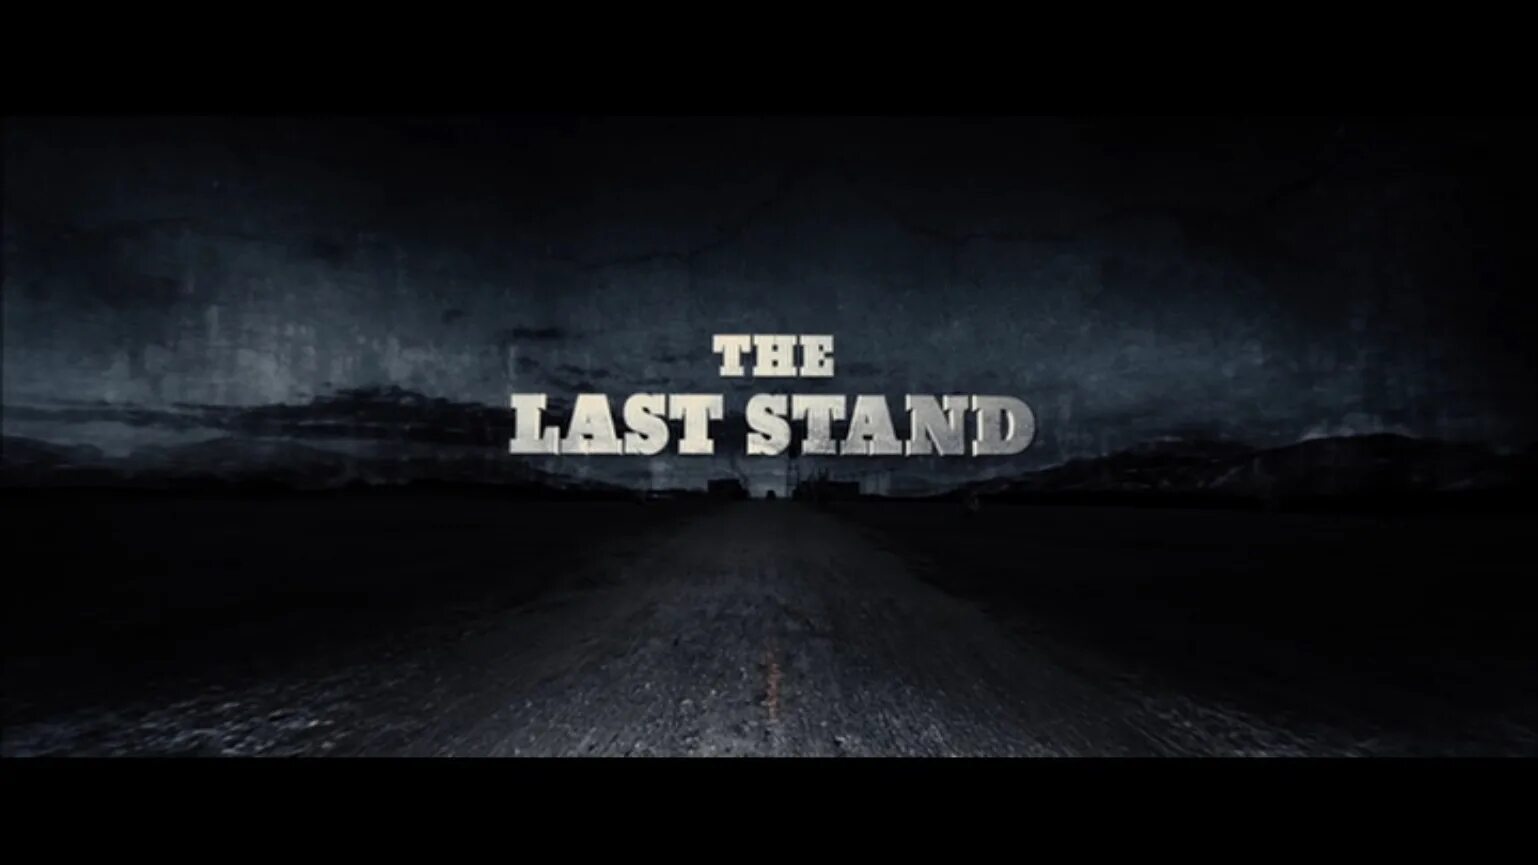 Gojo last stand. The last Stand. Сабатон зе ласт стенд. The last Stand 2013.